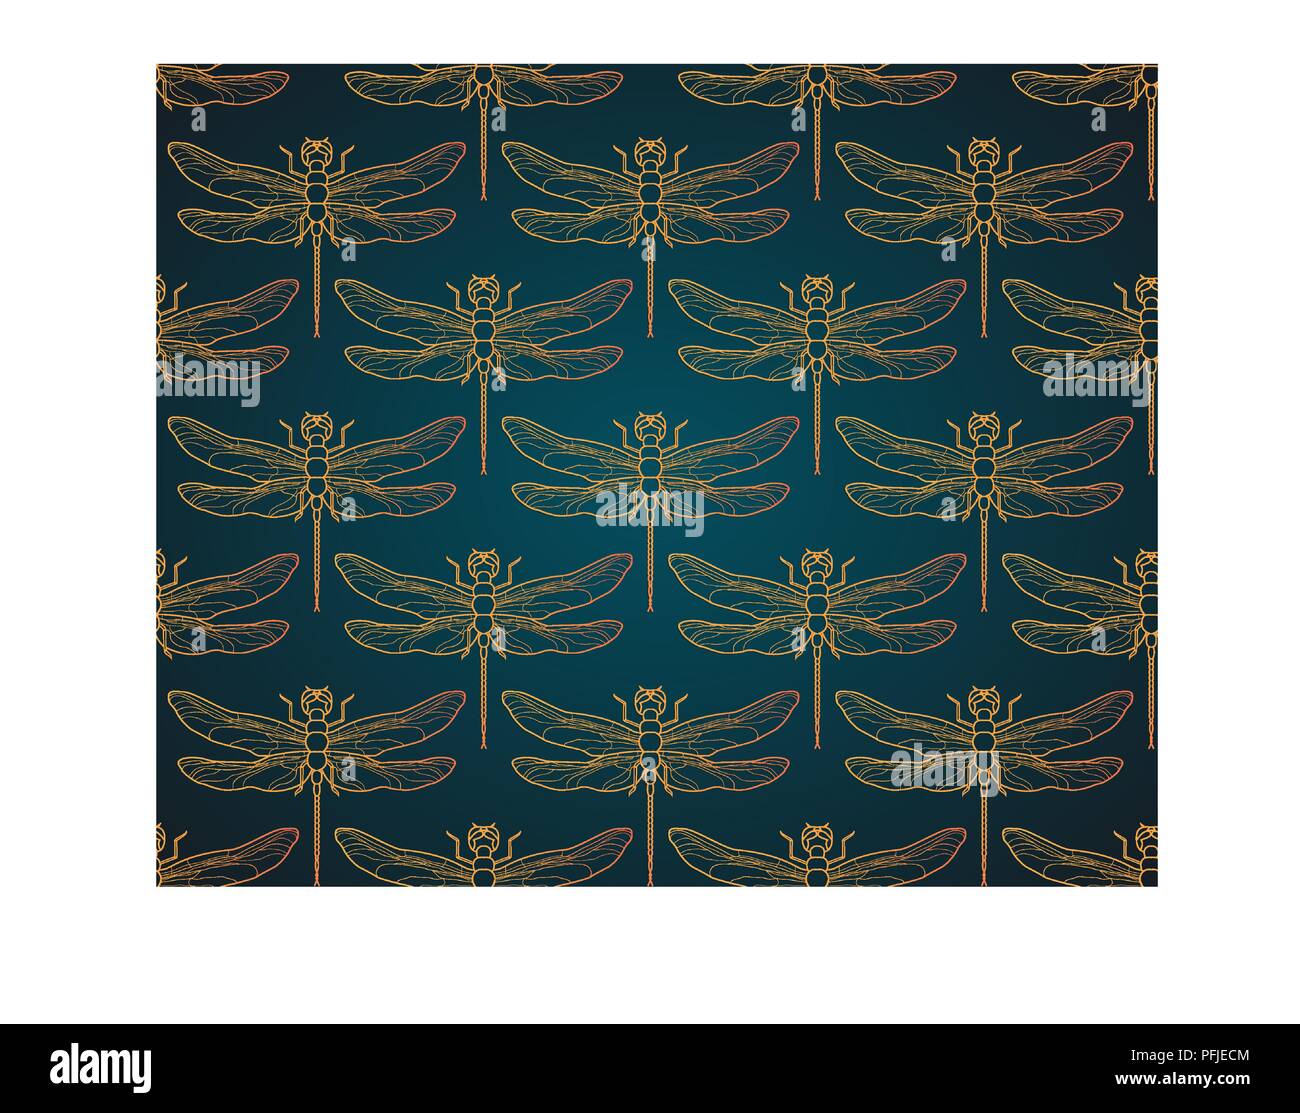 Dragonfly pattern seamless vector illustration. Insect pattern background gold. Vintage romantic tile luxury gold dragonfly on minimalistic dark elegant background. Black gold pattern. Stock Vector